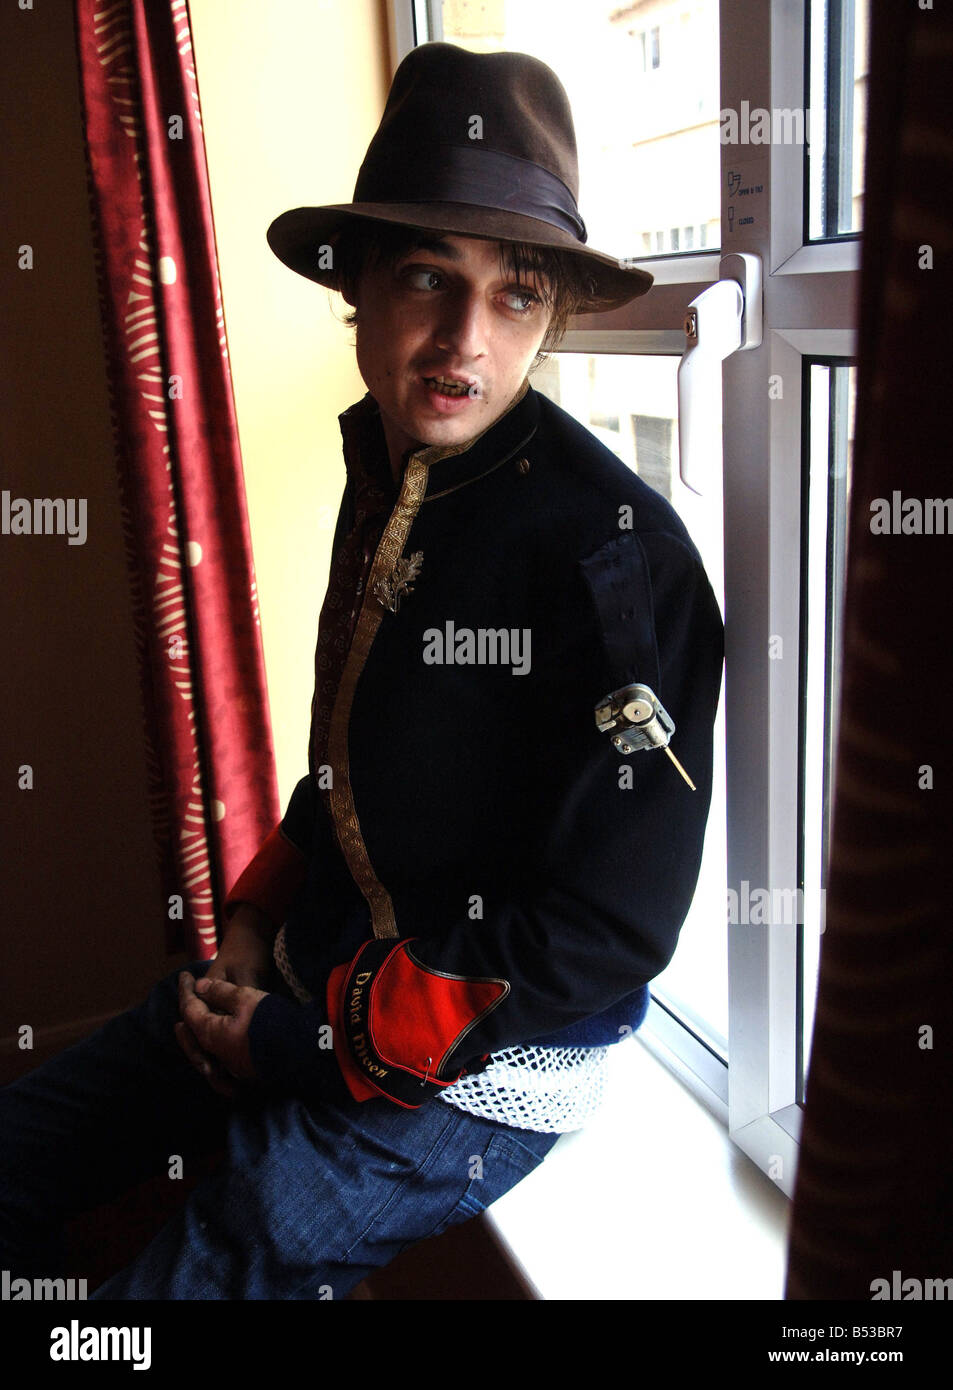 Pete Doherty pictured at the Jurys hotel in Islington during an Exclusive interview with the Daily Mirror August 2007 Stock Photo